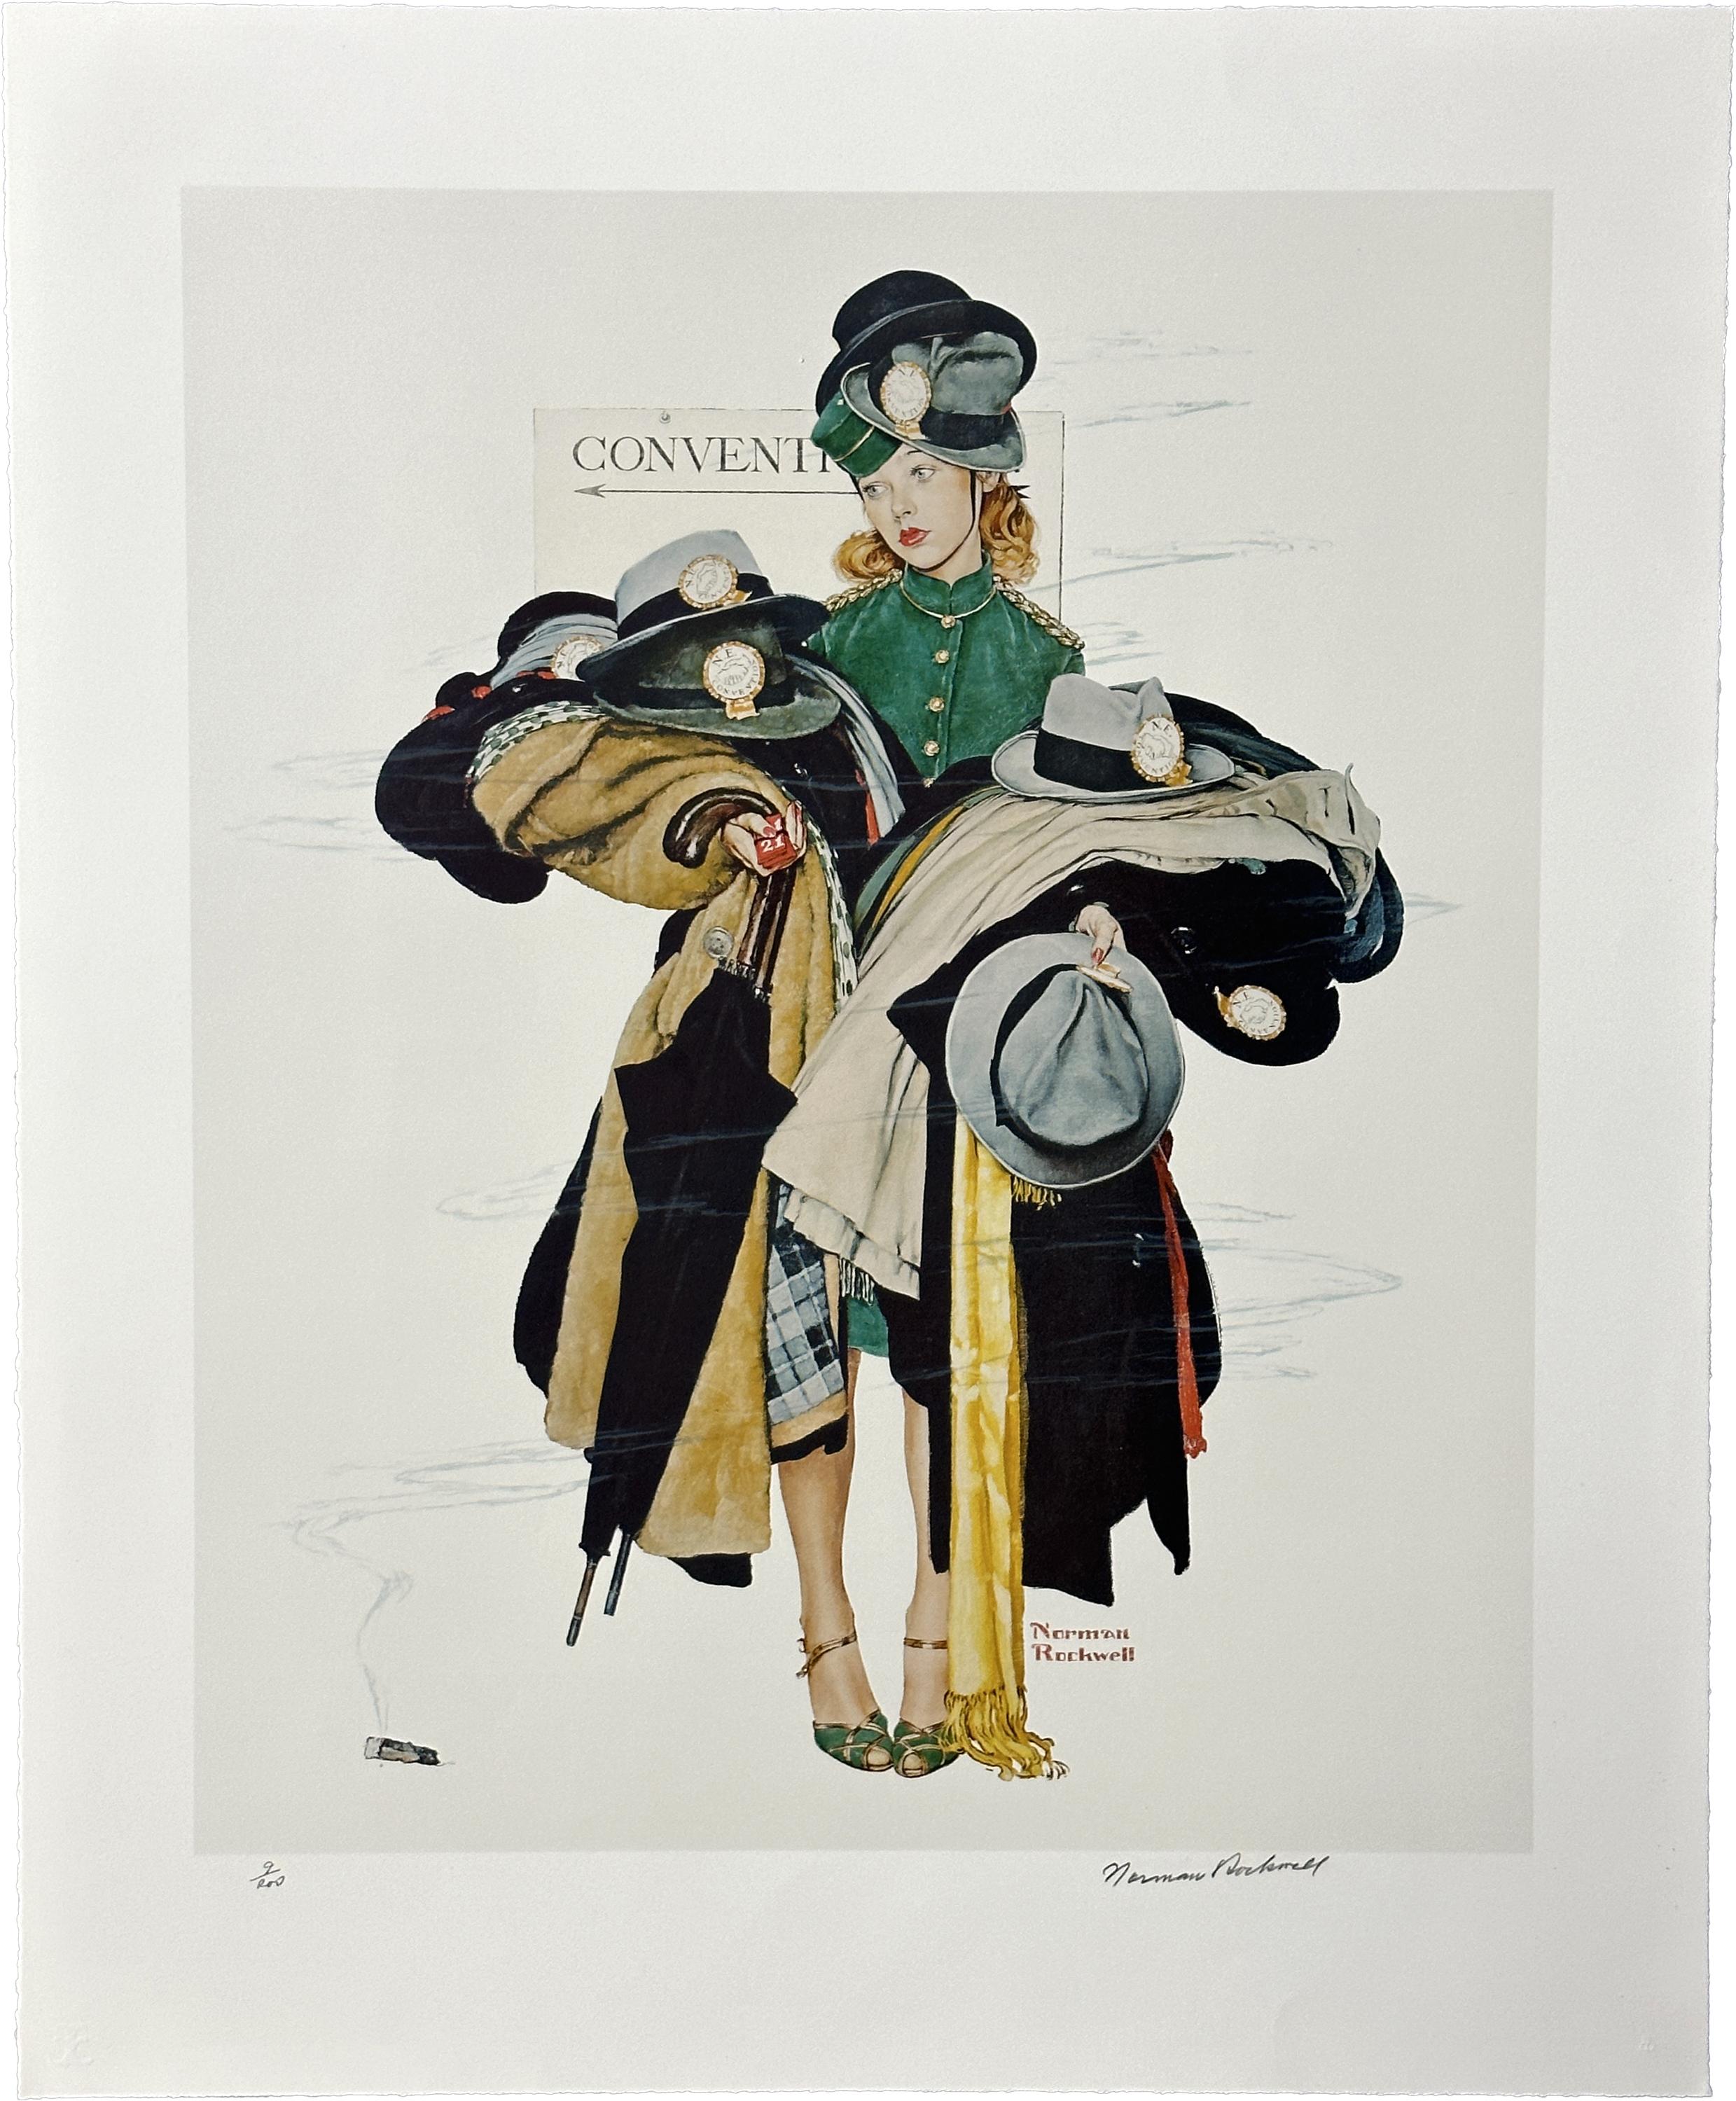 Norman Rockwell Figurative Print - Convention, 1976 Signed Limited Edition 7-Color Collotype on Rives BFK Paper